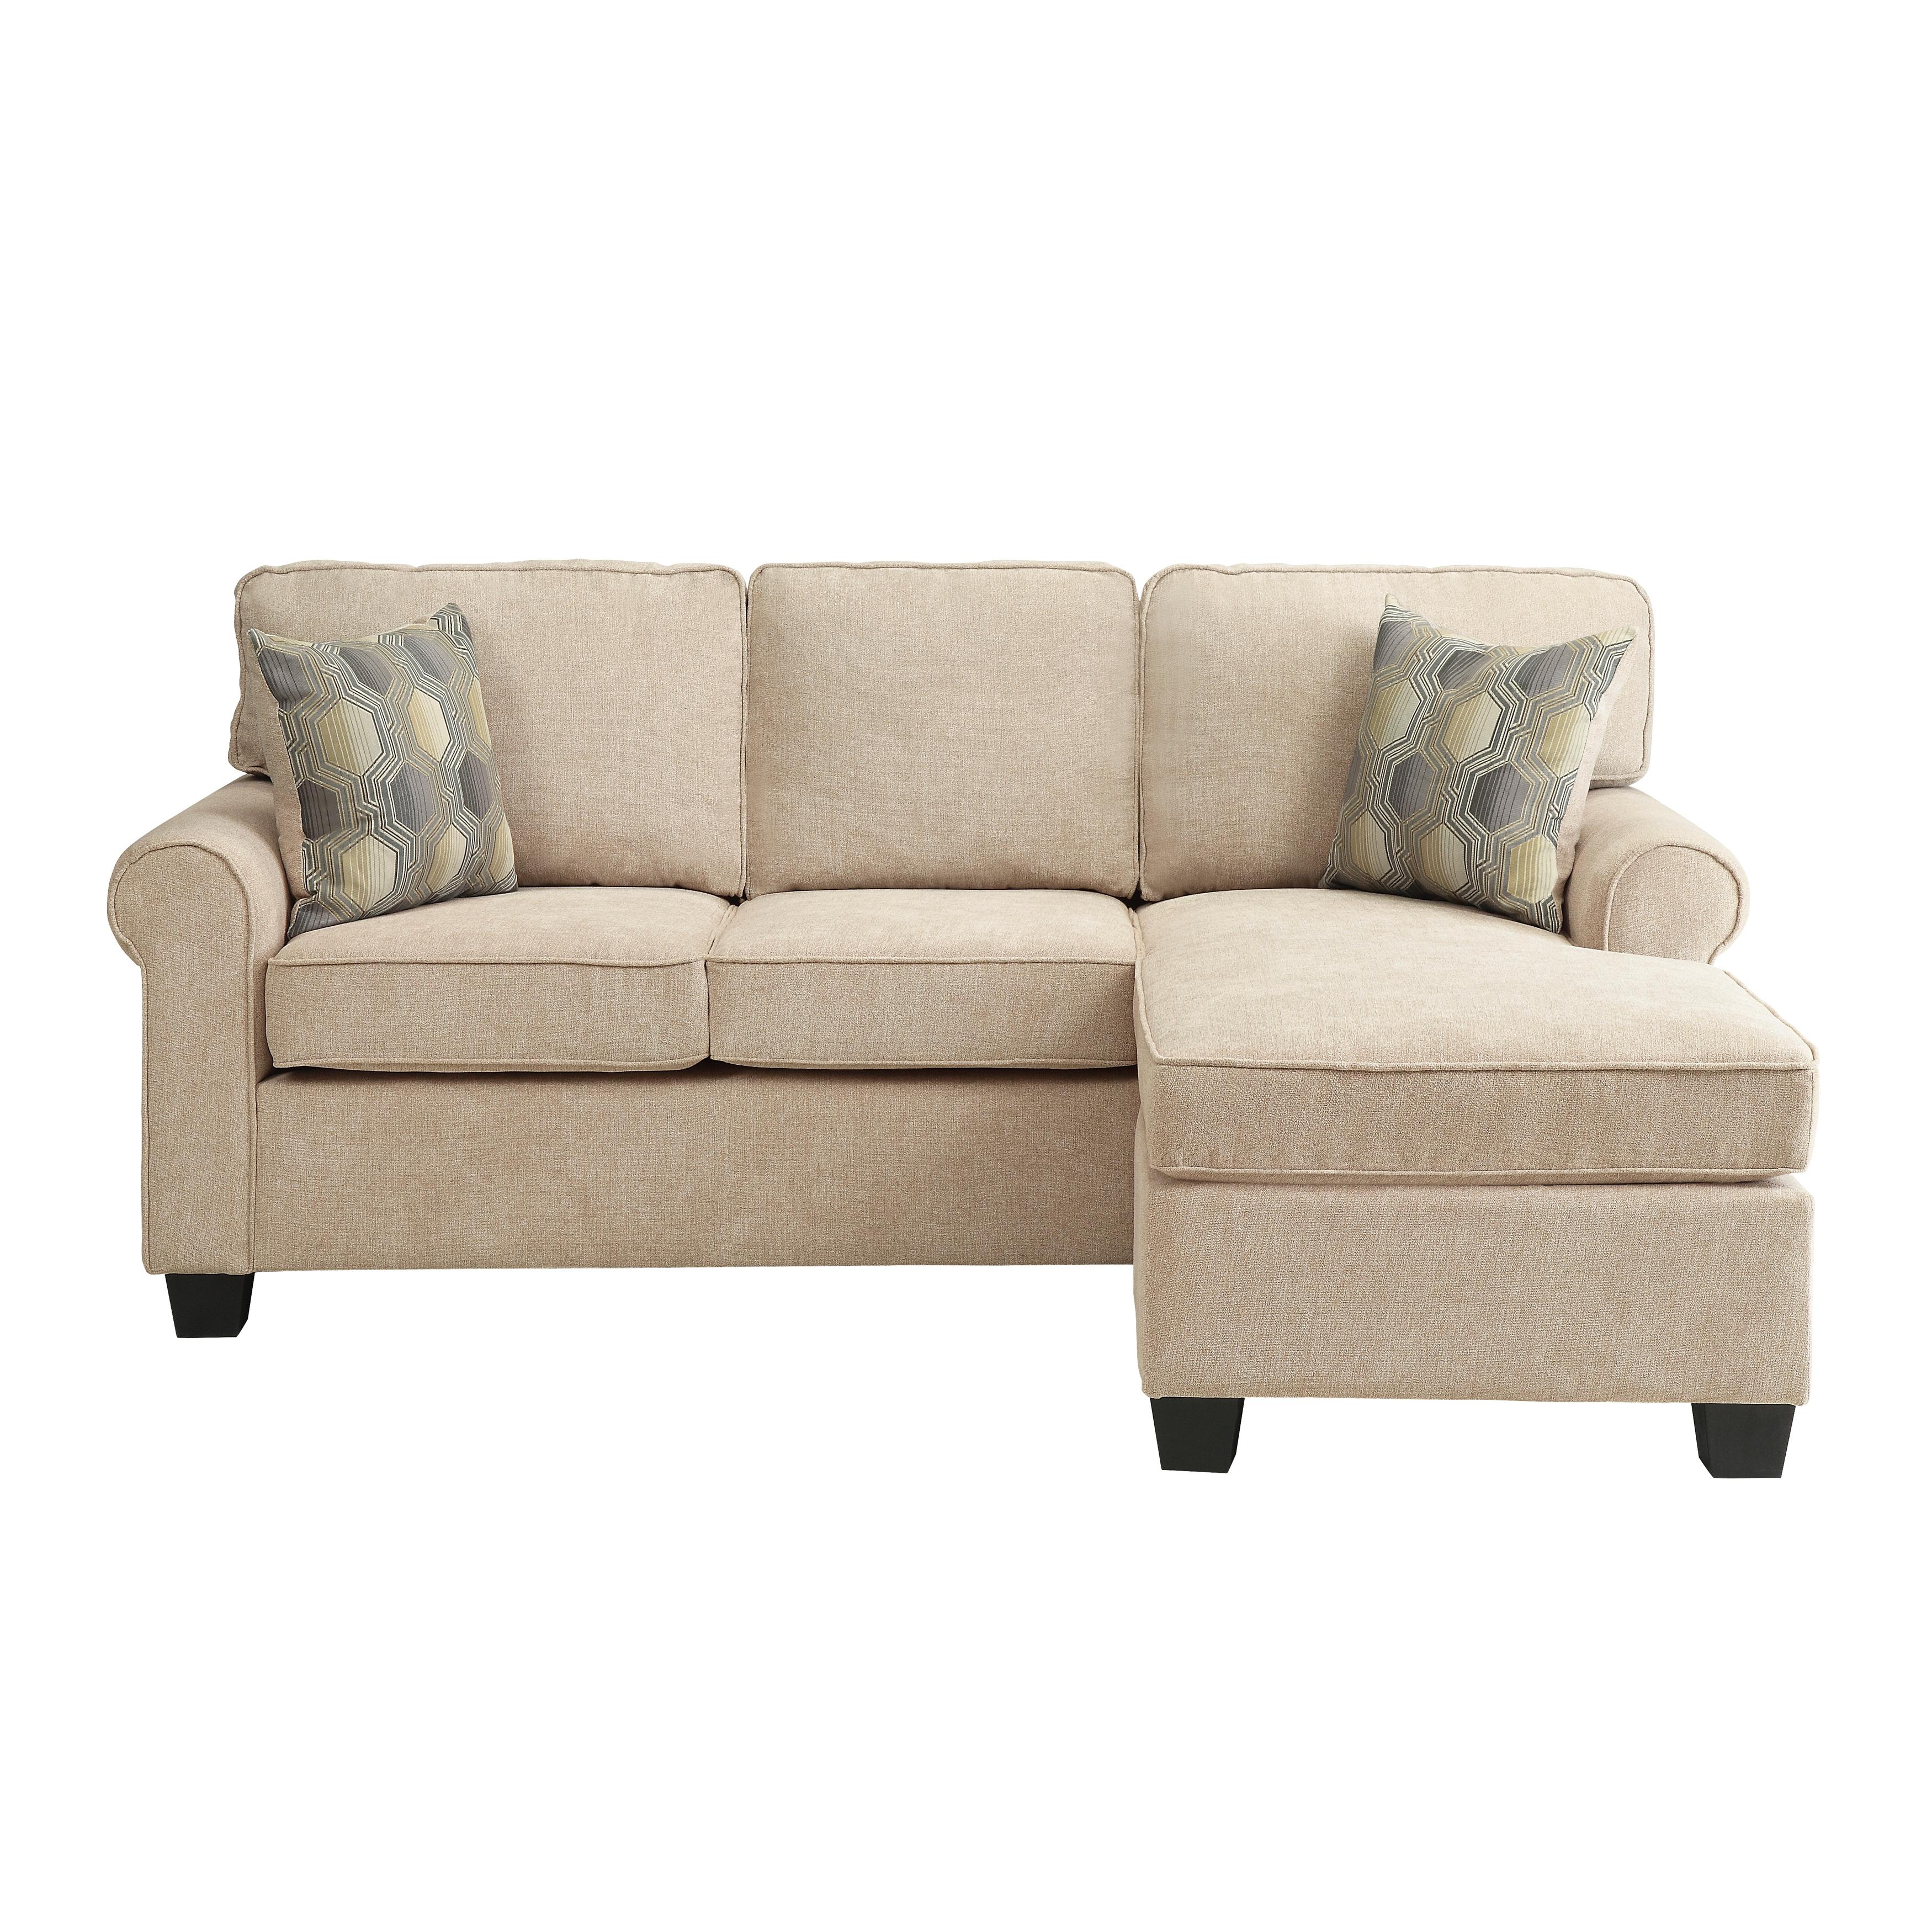 Transitional Reversible Sofa Chaise 9967-3SC Clumber 9967-3SC in Sand Microfiber